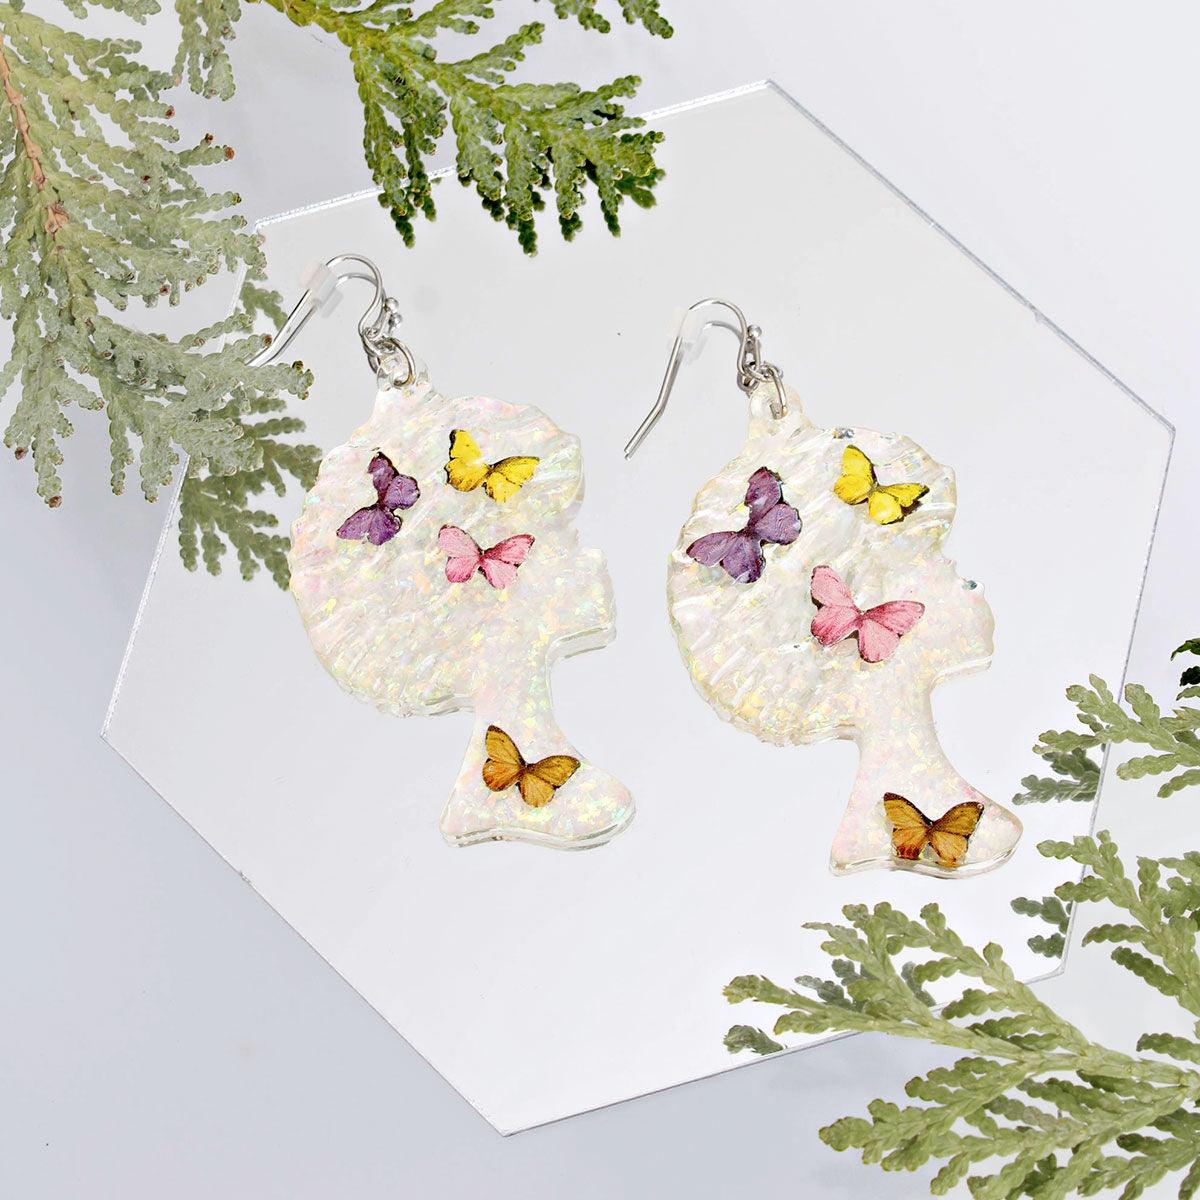 Get Your Afro Multicolor Butterfly Earrings Here - Perfect Accessory!